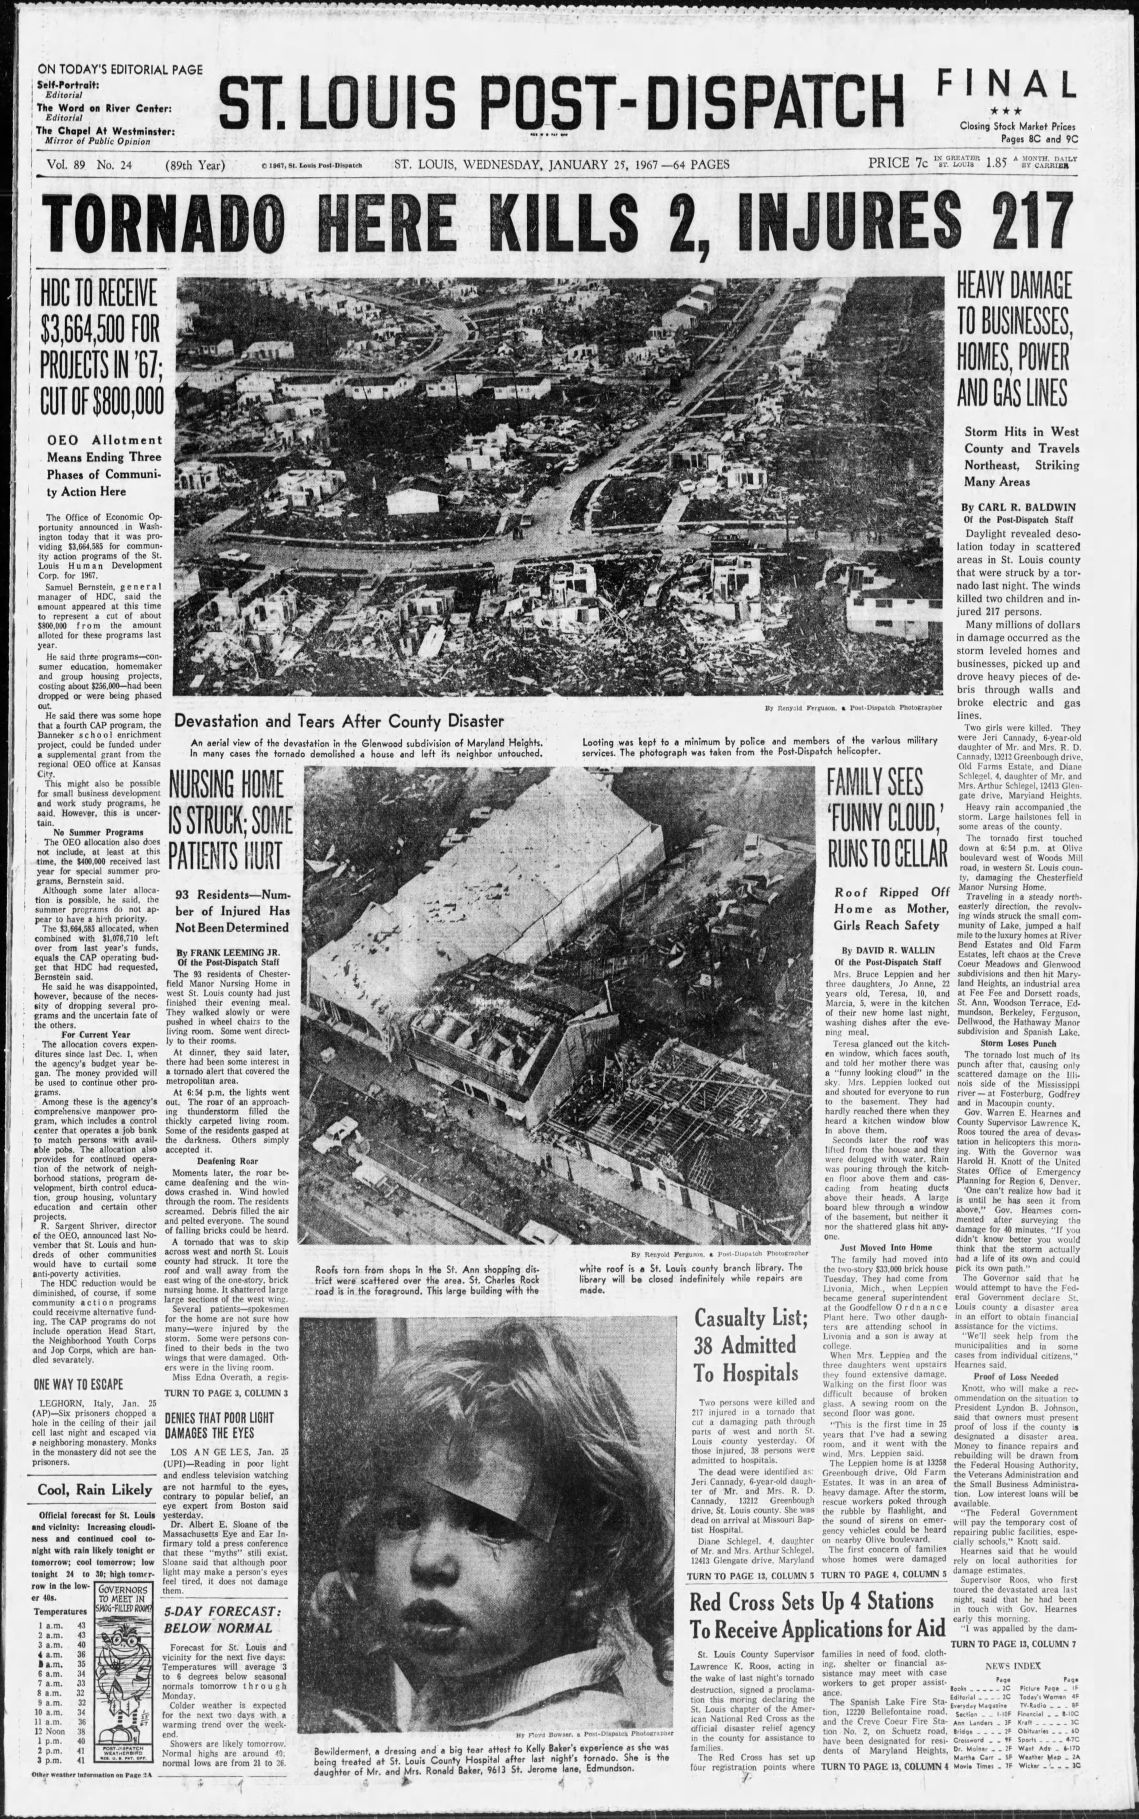 Post-Dispatch pages: The Tornado of 1967 | Post-Dispatch Archives | www.strongerinc.org